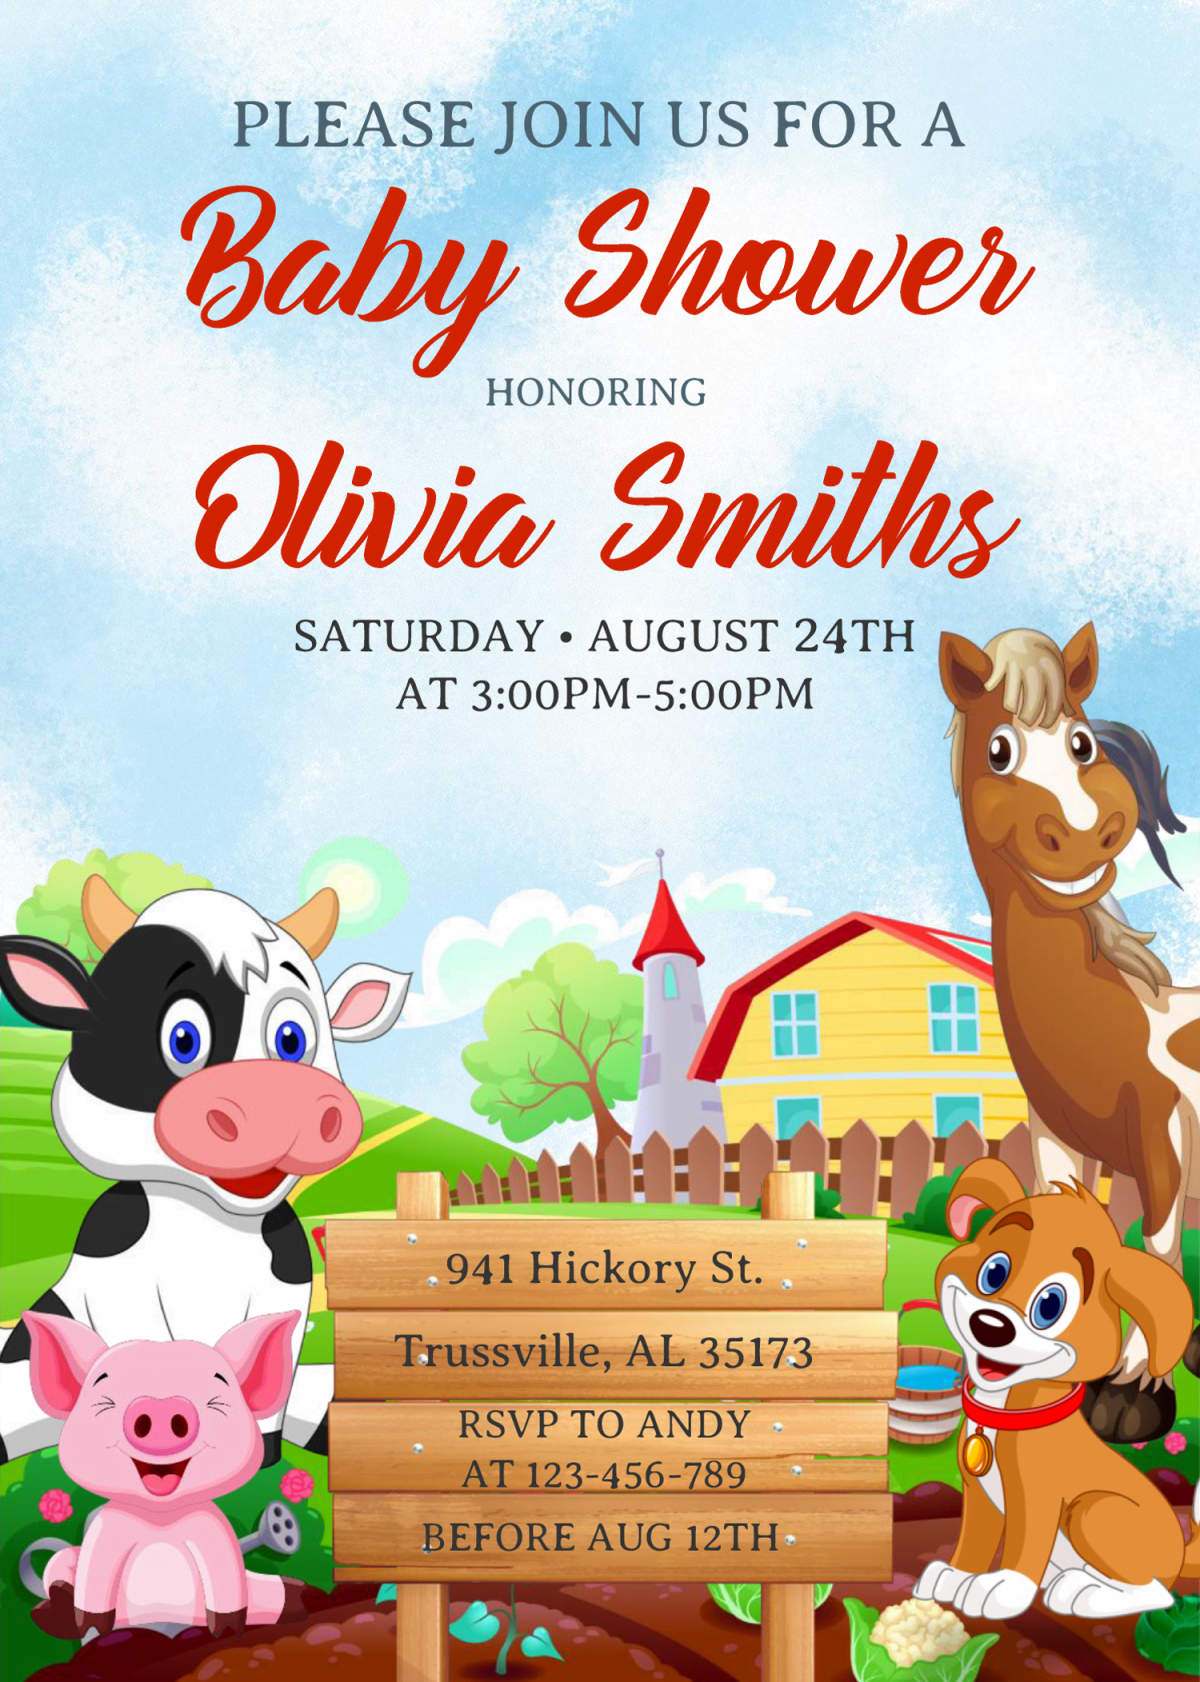 Farm Animals Invitation Templates - Editable With Microsoft Word and has adorable cartoon horse and pig